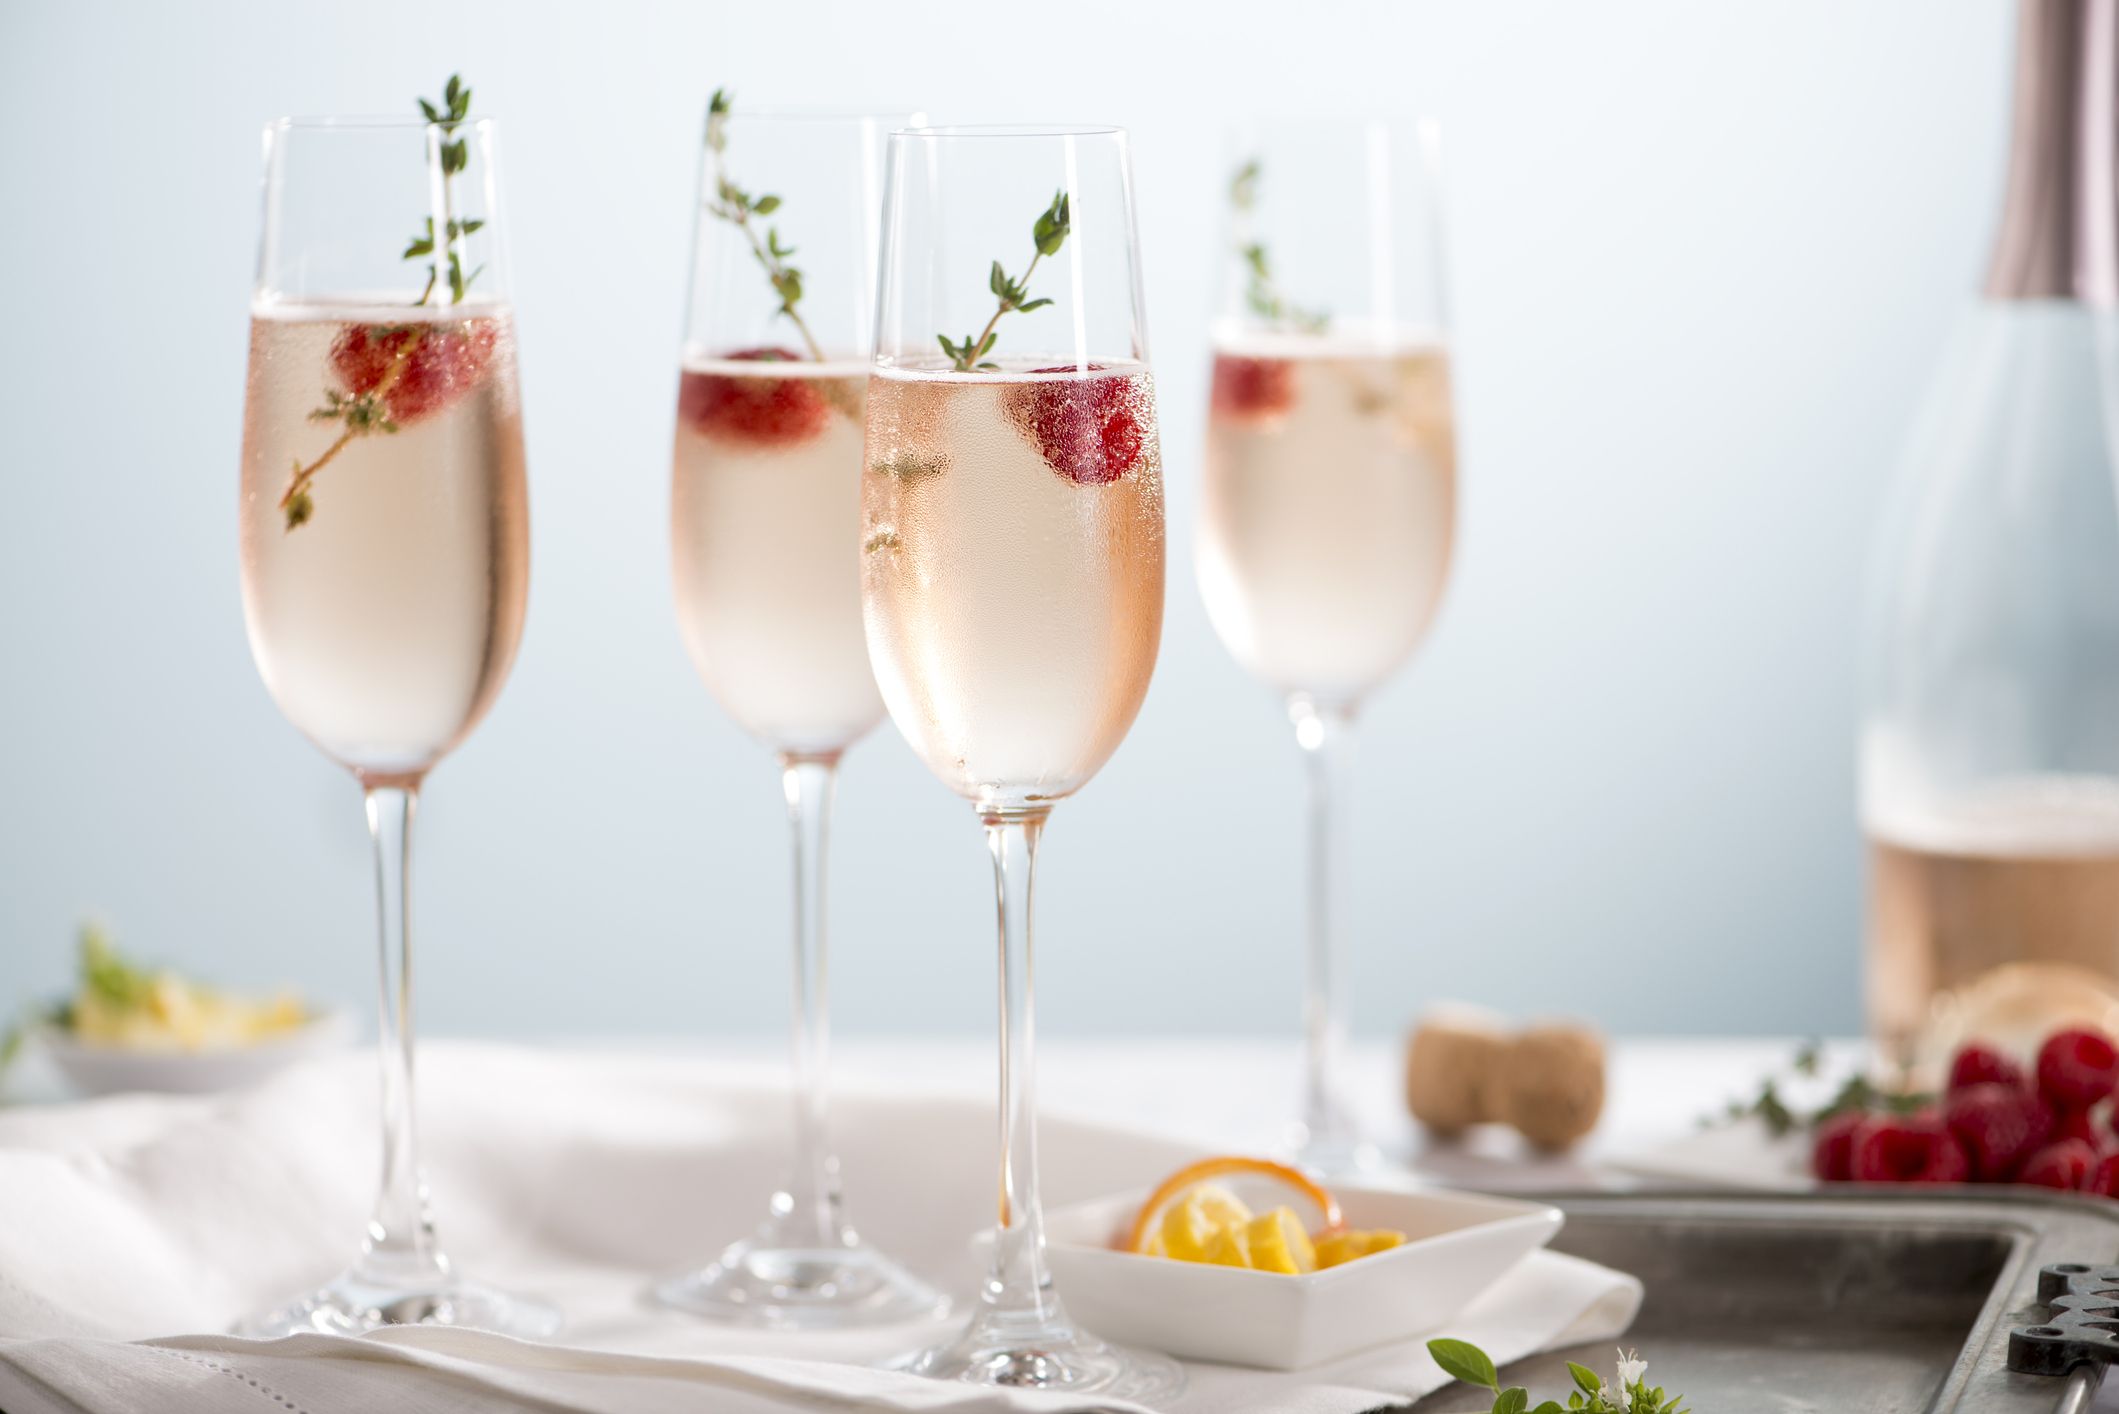 The Best Pink Prosecco for Your Fabulous Post-Pandemic Frivolity